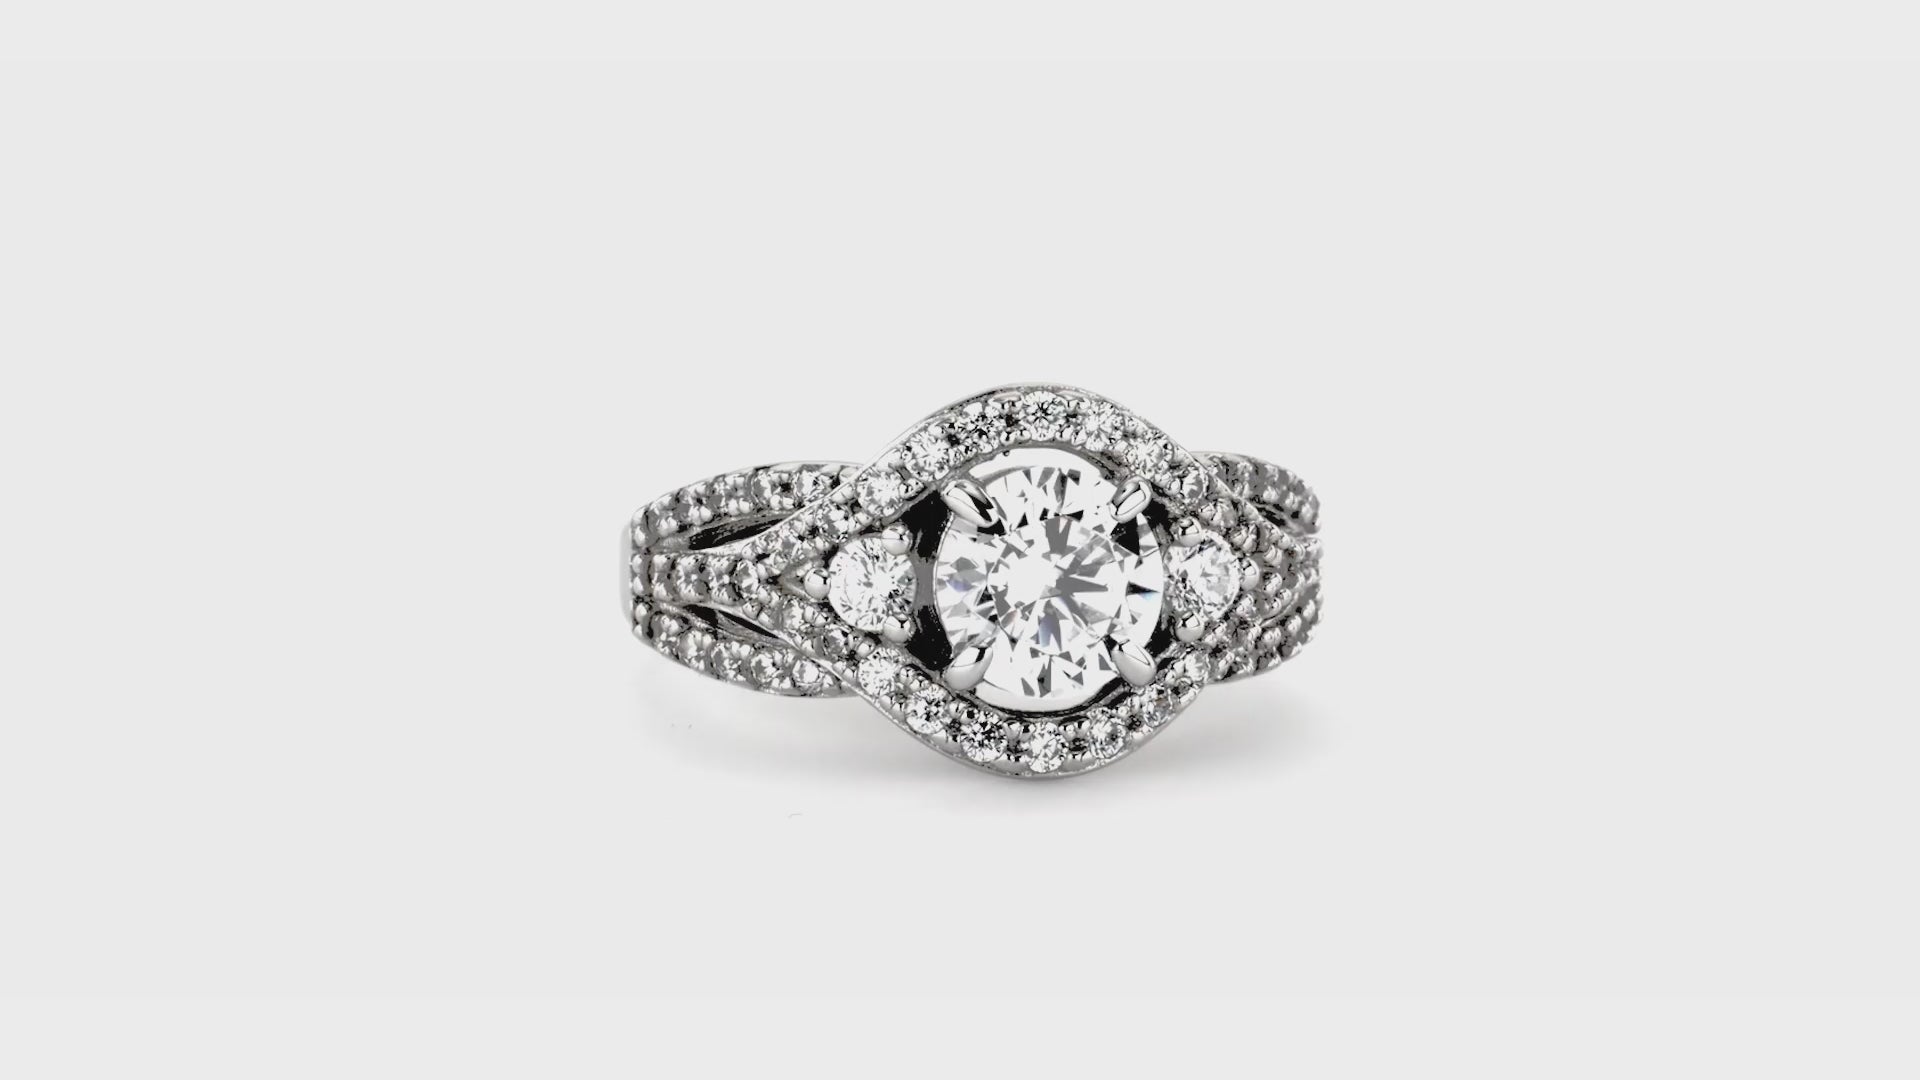 Video Contains 3-Stone Crown Round CZ Ring Set in Sterling Silver. Style Number VR282-01